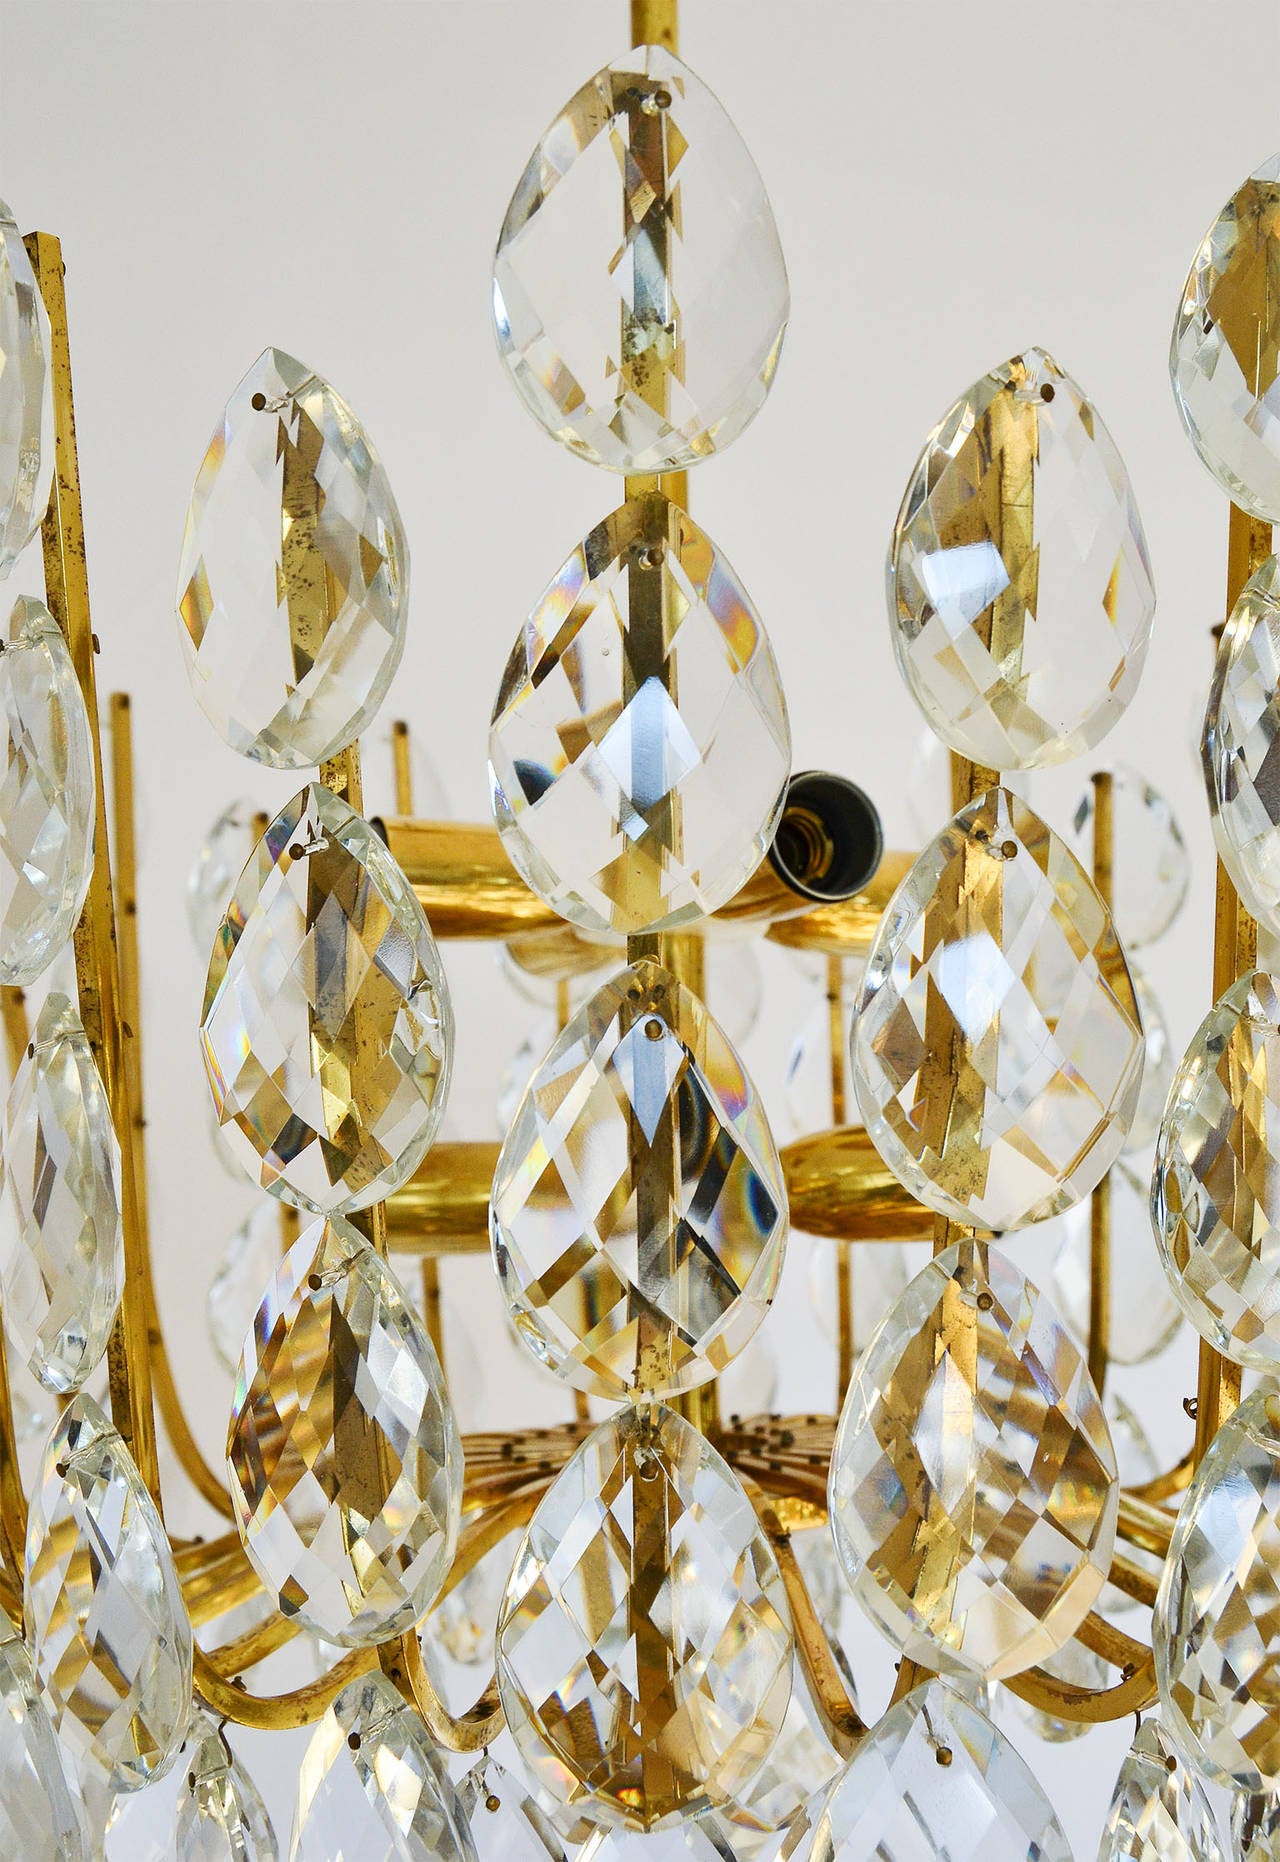 Mid-20th Century Basket Chandelier Pedant Light, Brass and Crystal Glass, Austria, 1950s